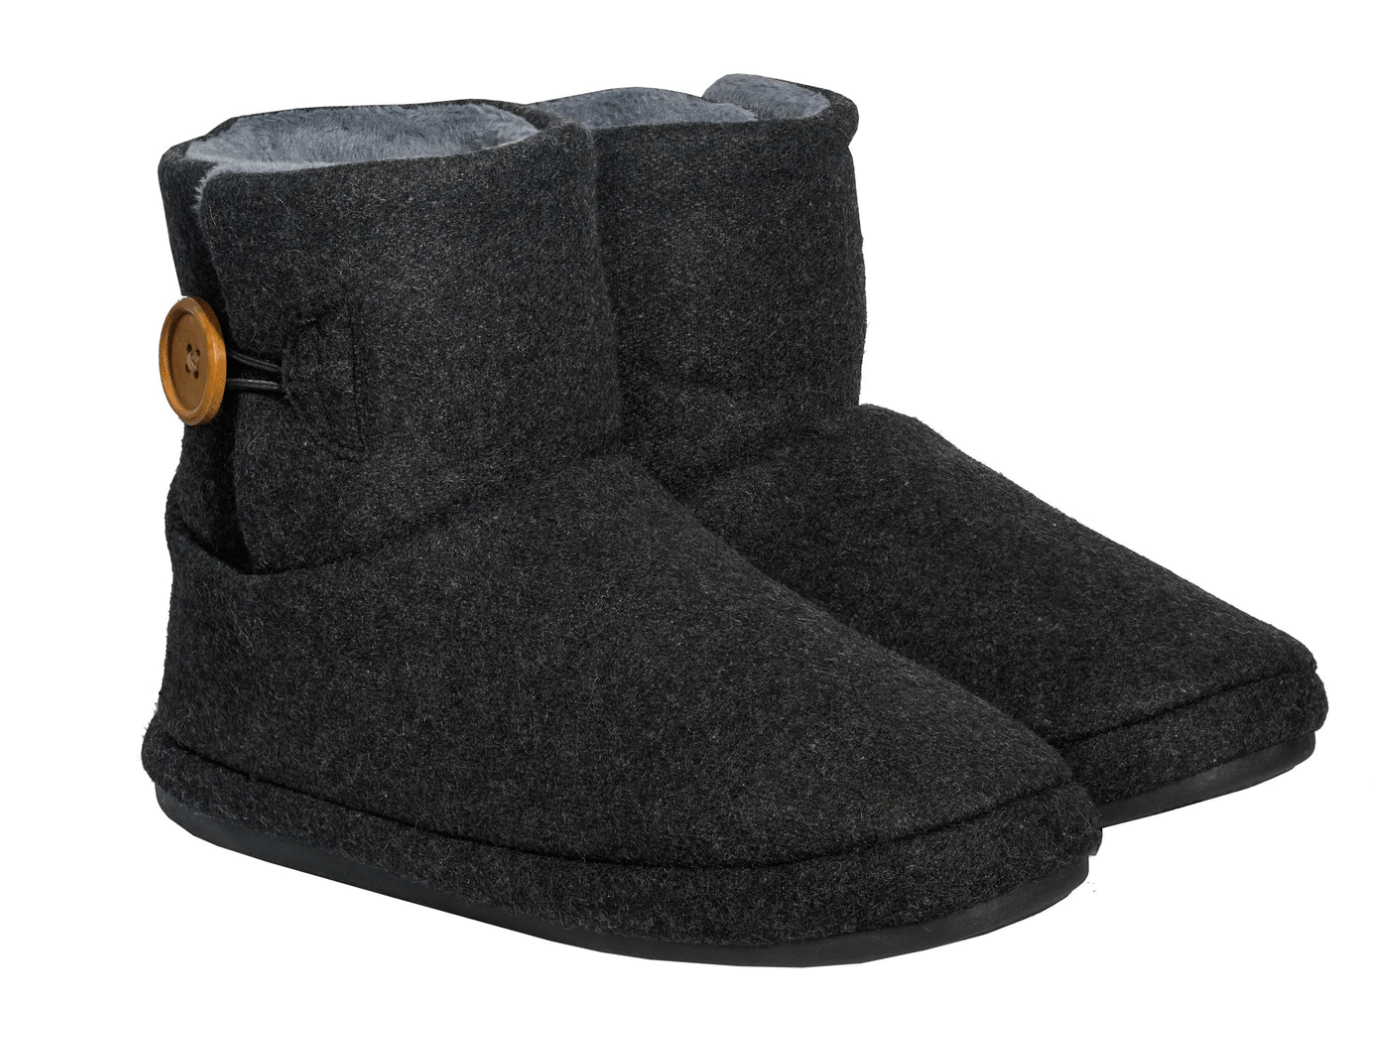 Axign Footwear 35 Charcoal Ugg Boot Unisex Arch Supporting Slippers